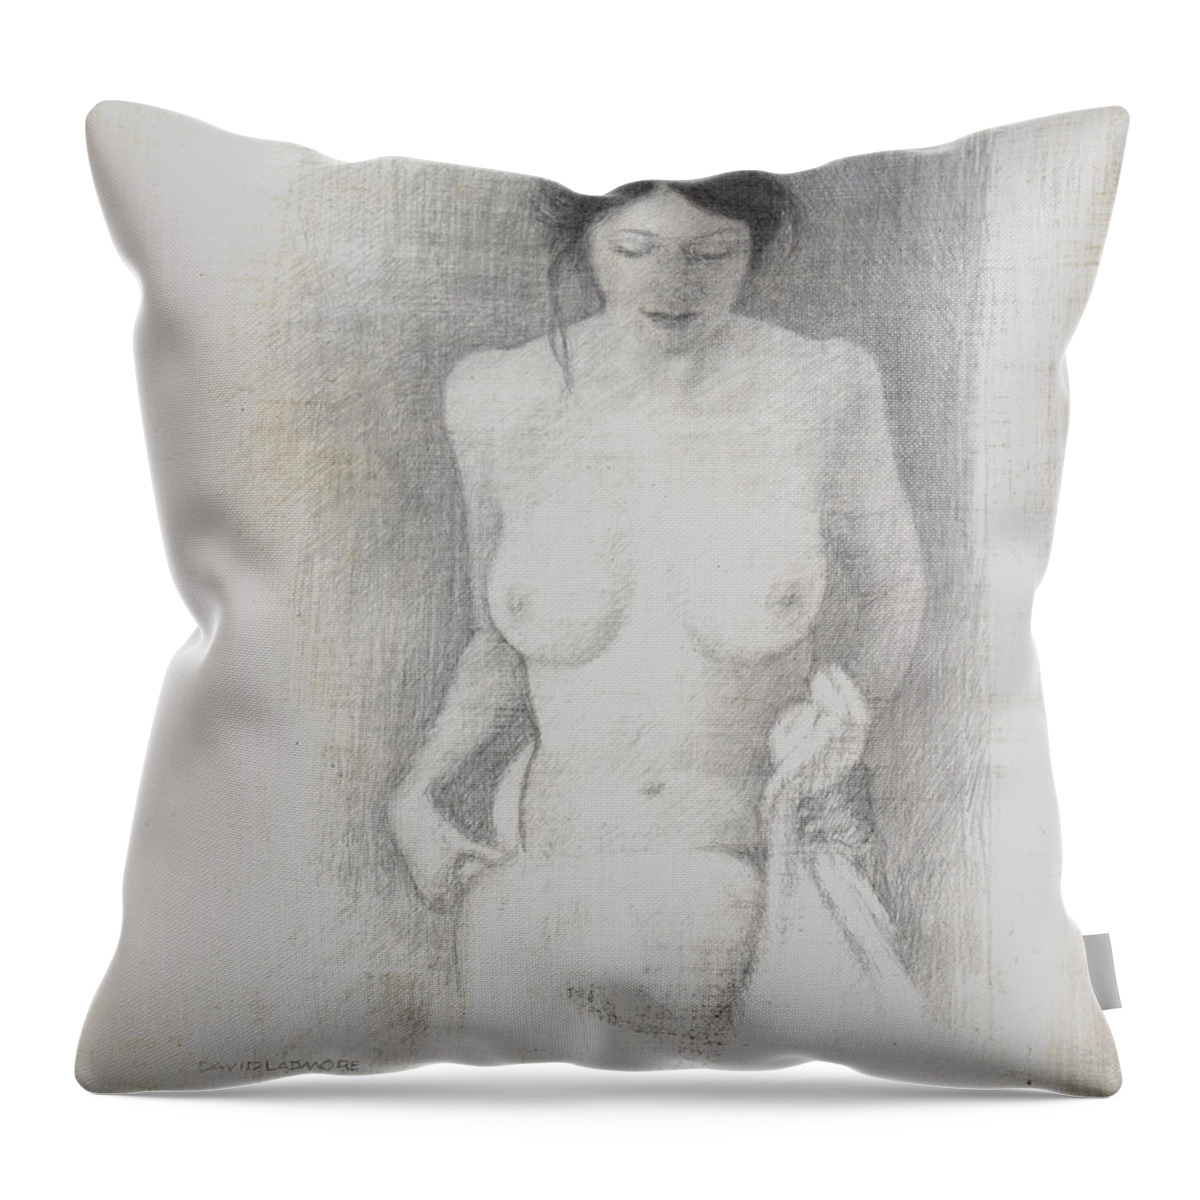 Breasts Throw Pillow featuring the drawing Figure Study 6 by David Ladmore